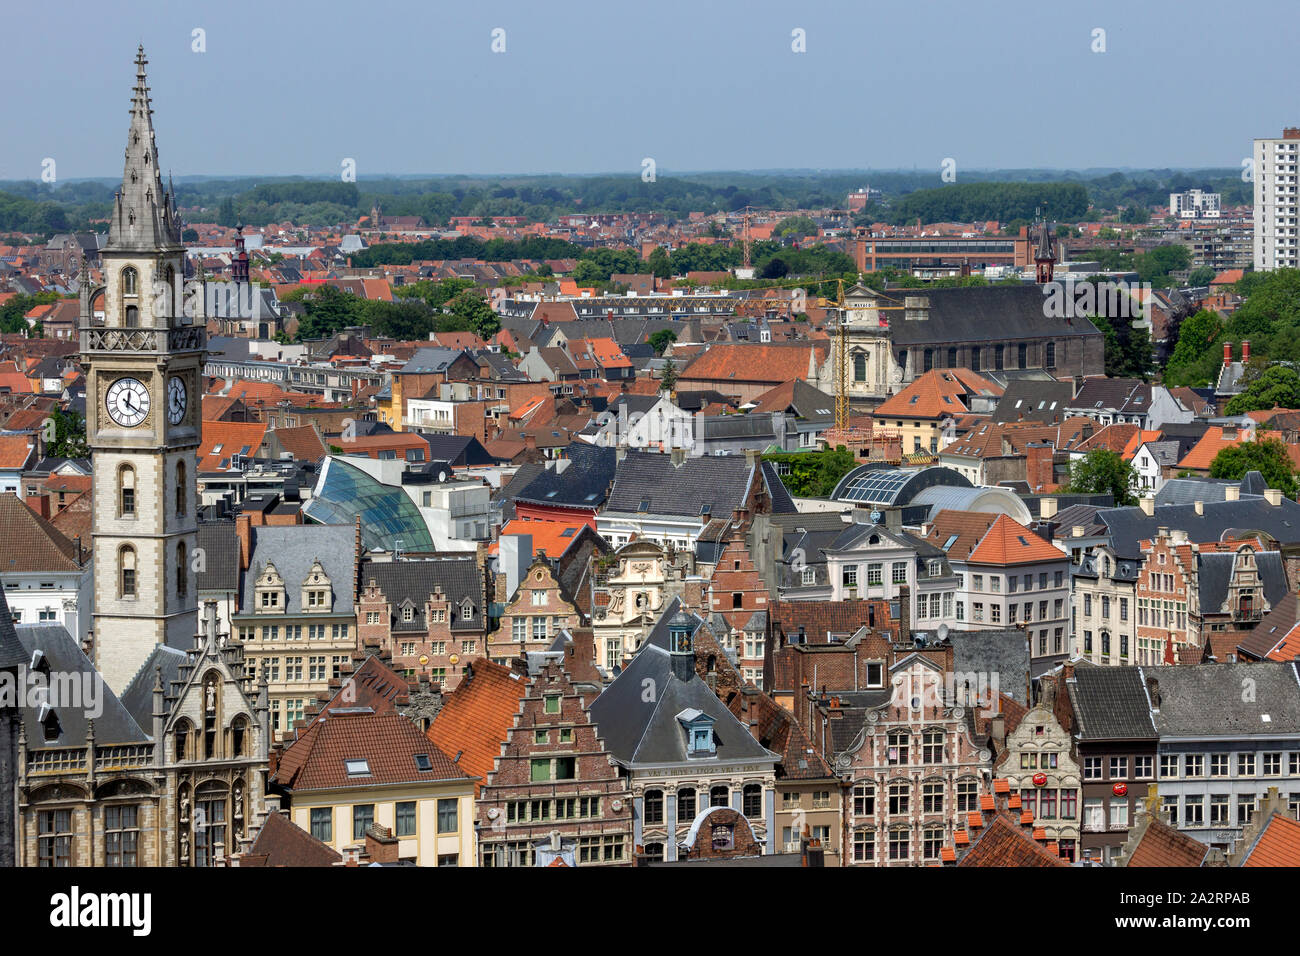 GHENT, BELGIUM - JUN 18, 2013: View on the historical center of Gent with it's gabled houses. Stock Photo